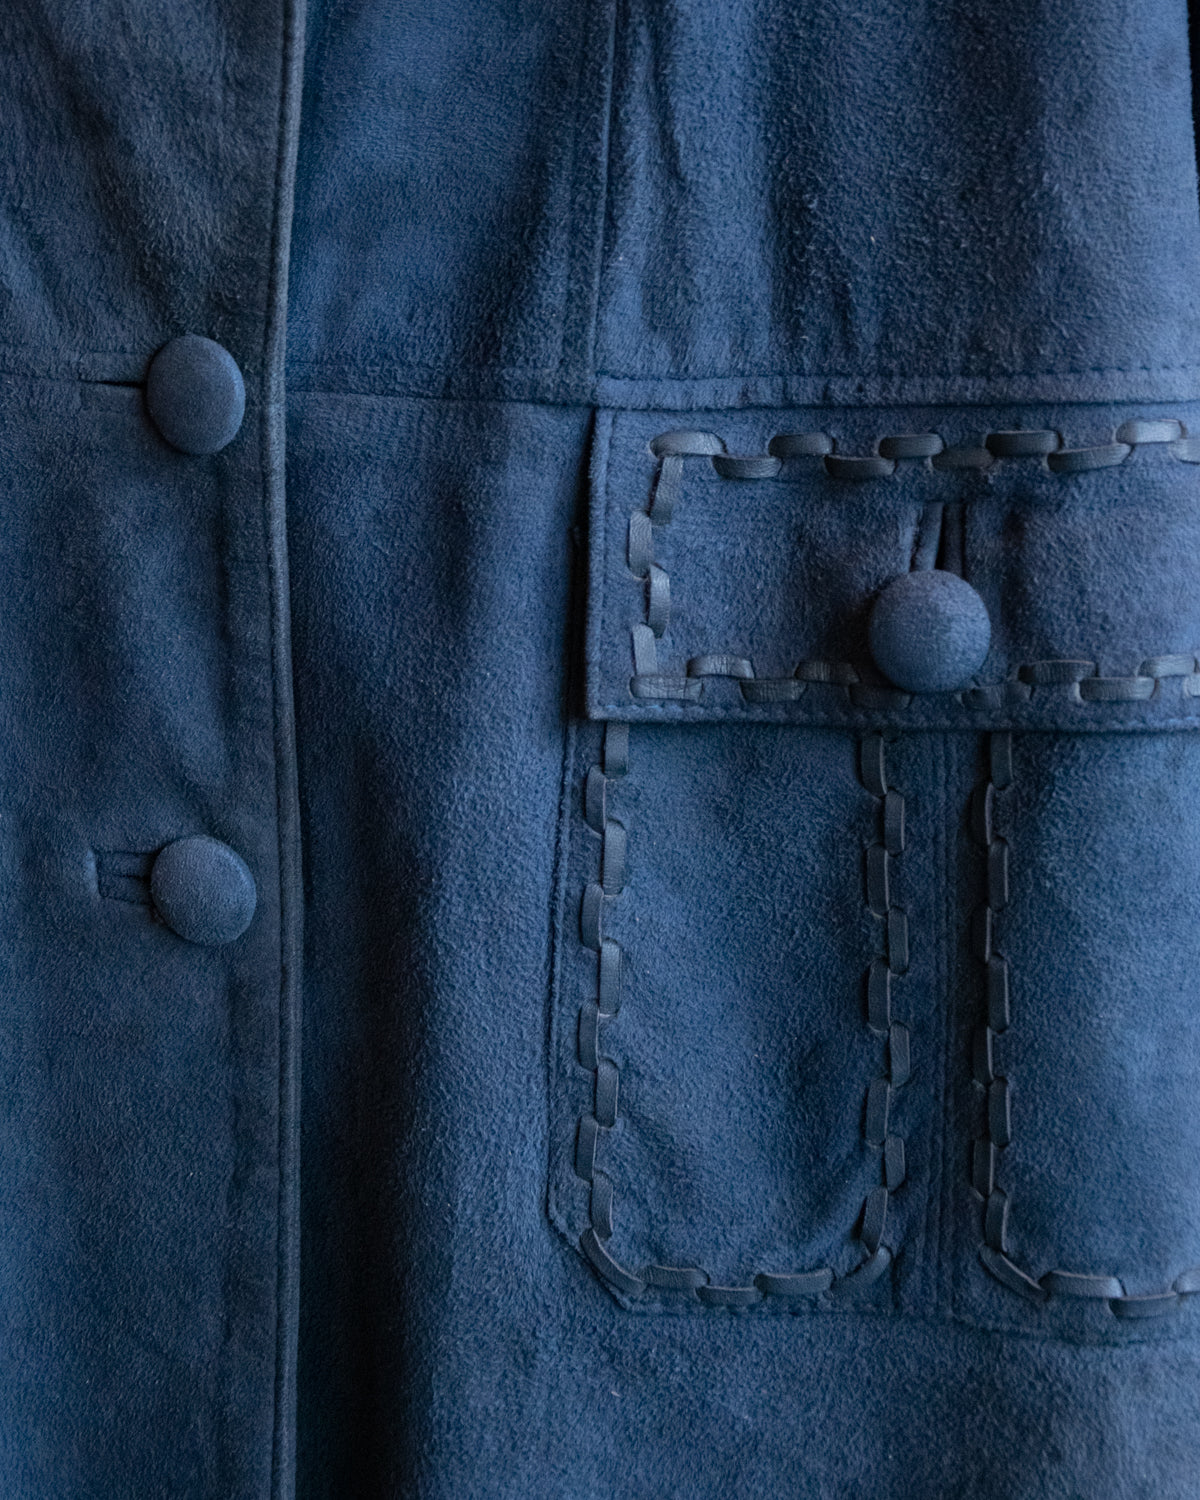 70s Vintage Blue Suede Trench Coat